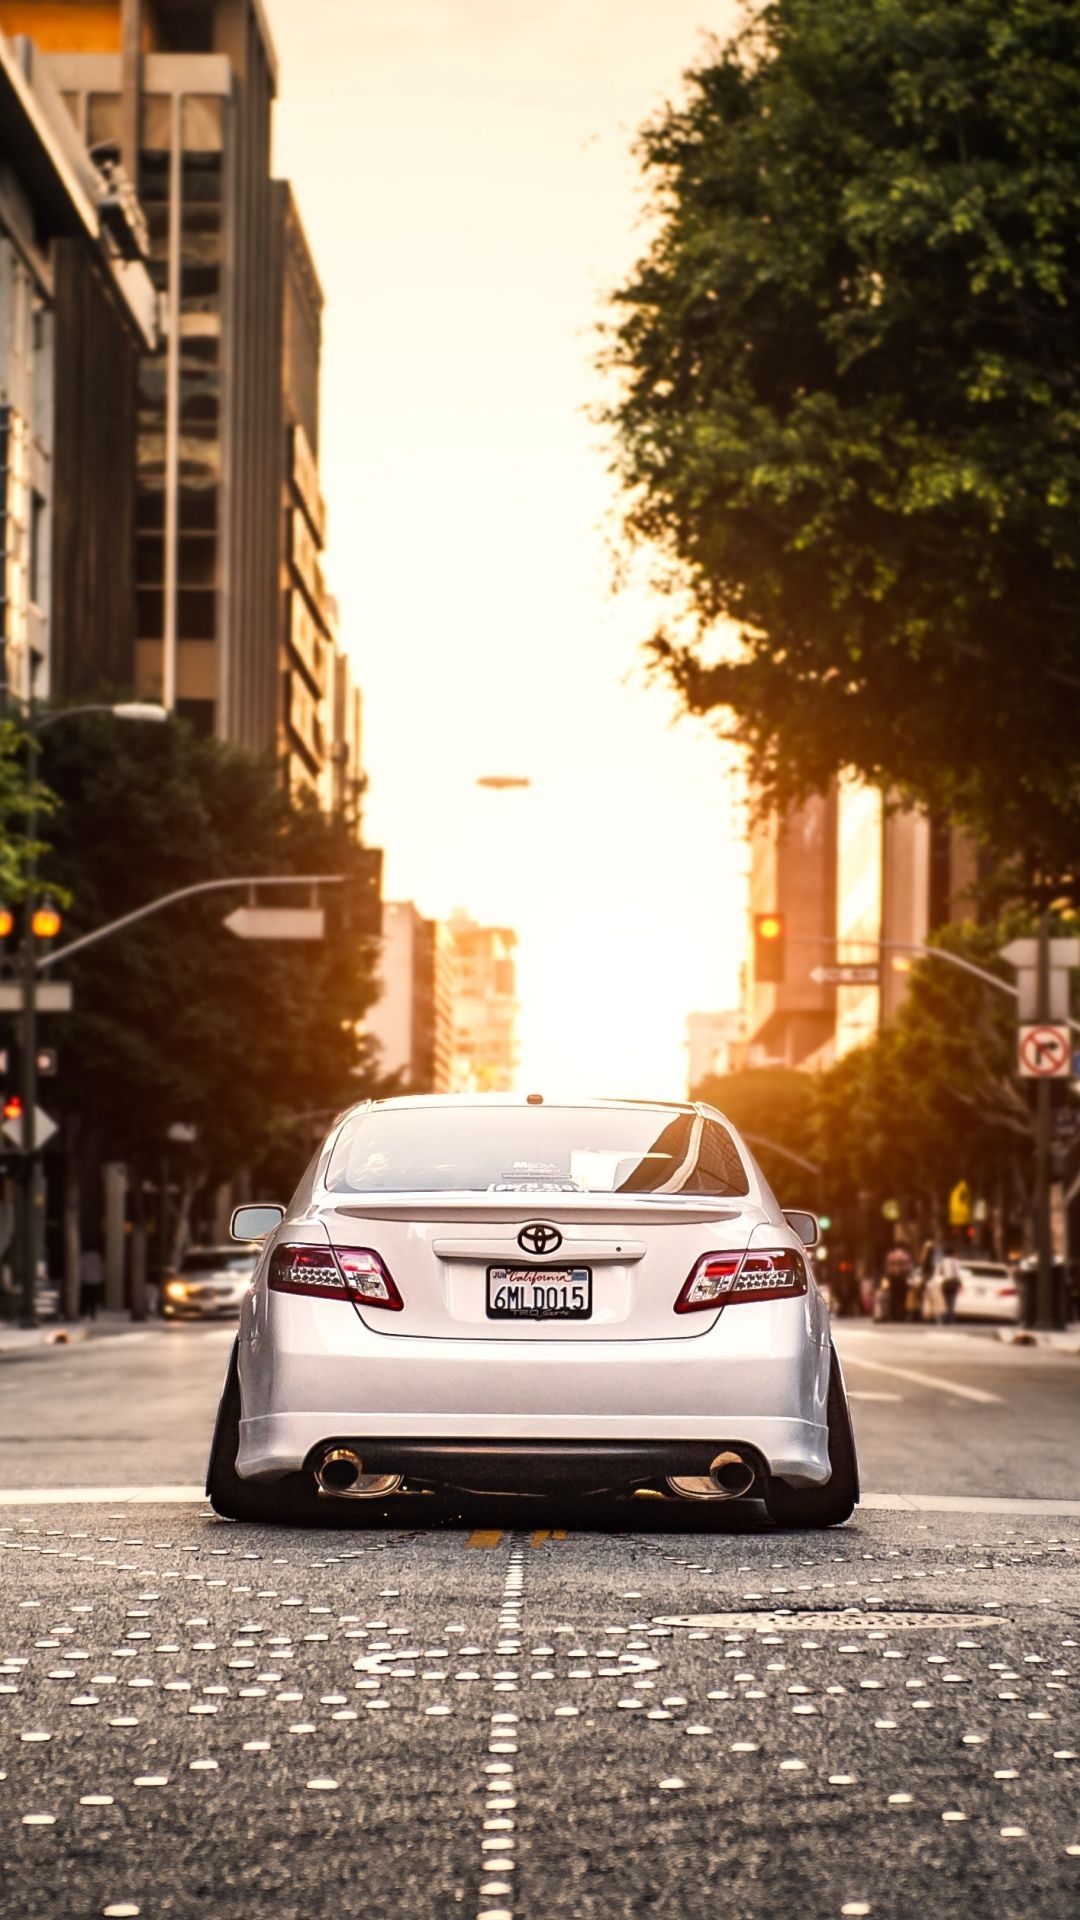 Toyota Camry, iPhone wallpapers, Top sellers, Backgrounds and images, 1080x1920 Full HD Phone